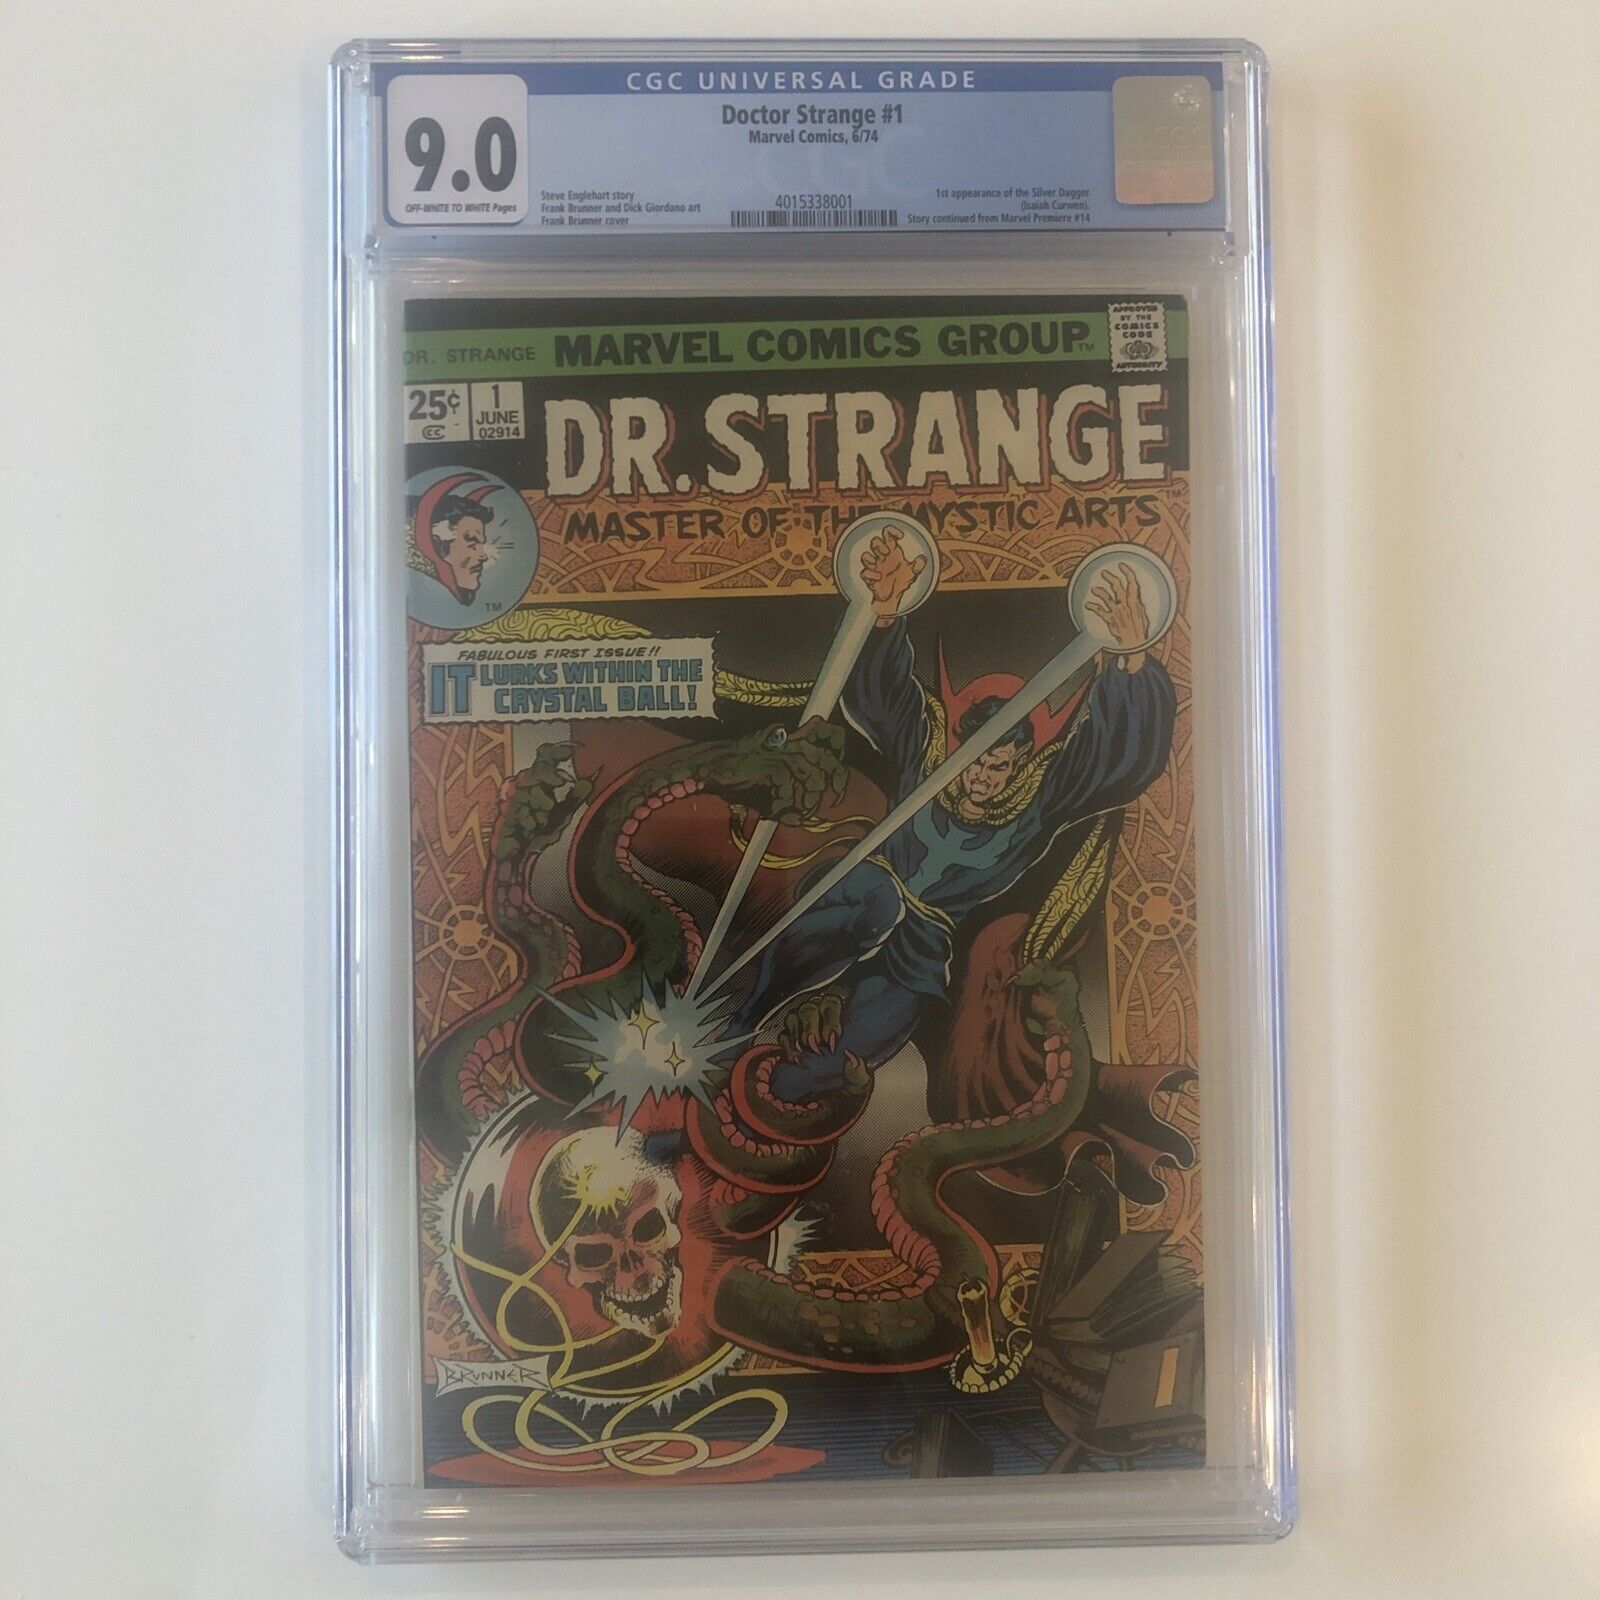 Doctor Strange #1 CGC 9.0 - great clean press resubmit candidate - 1974 Dr.